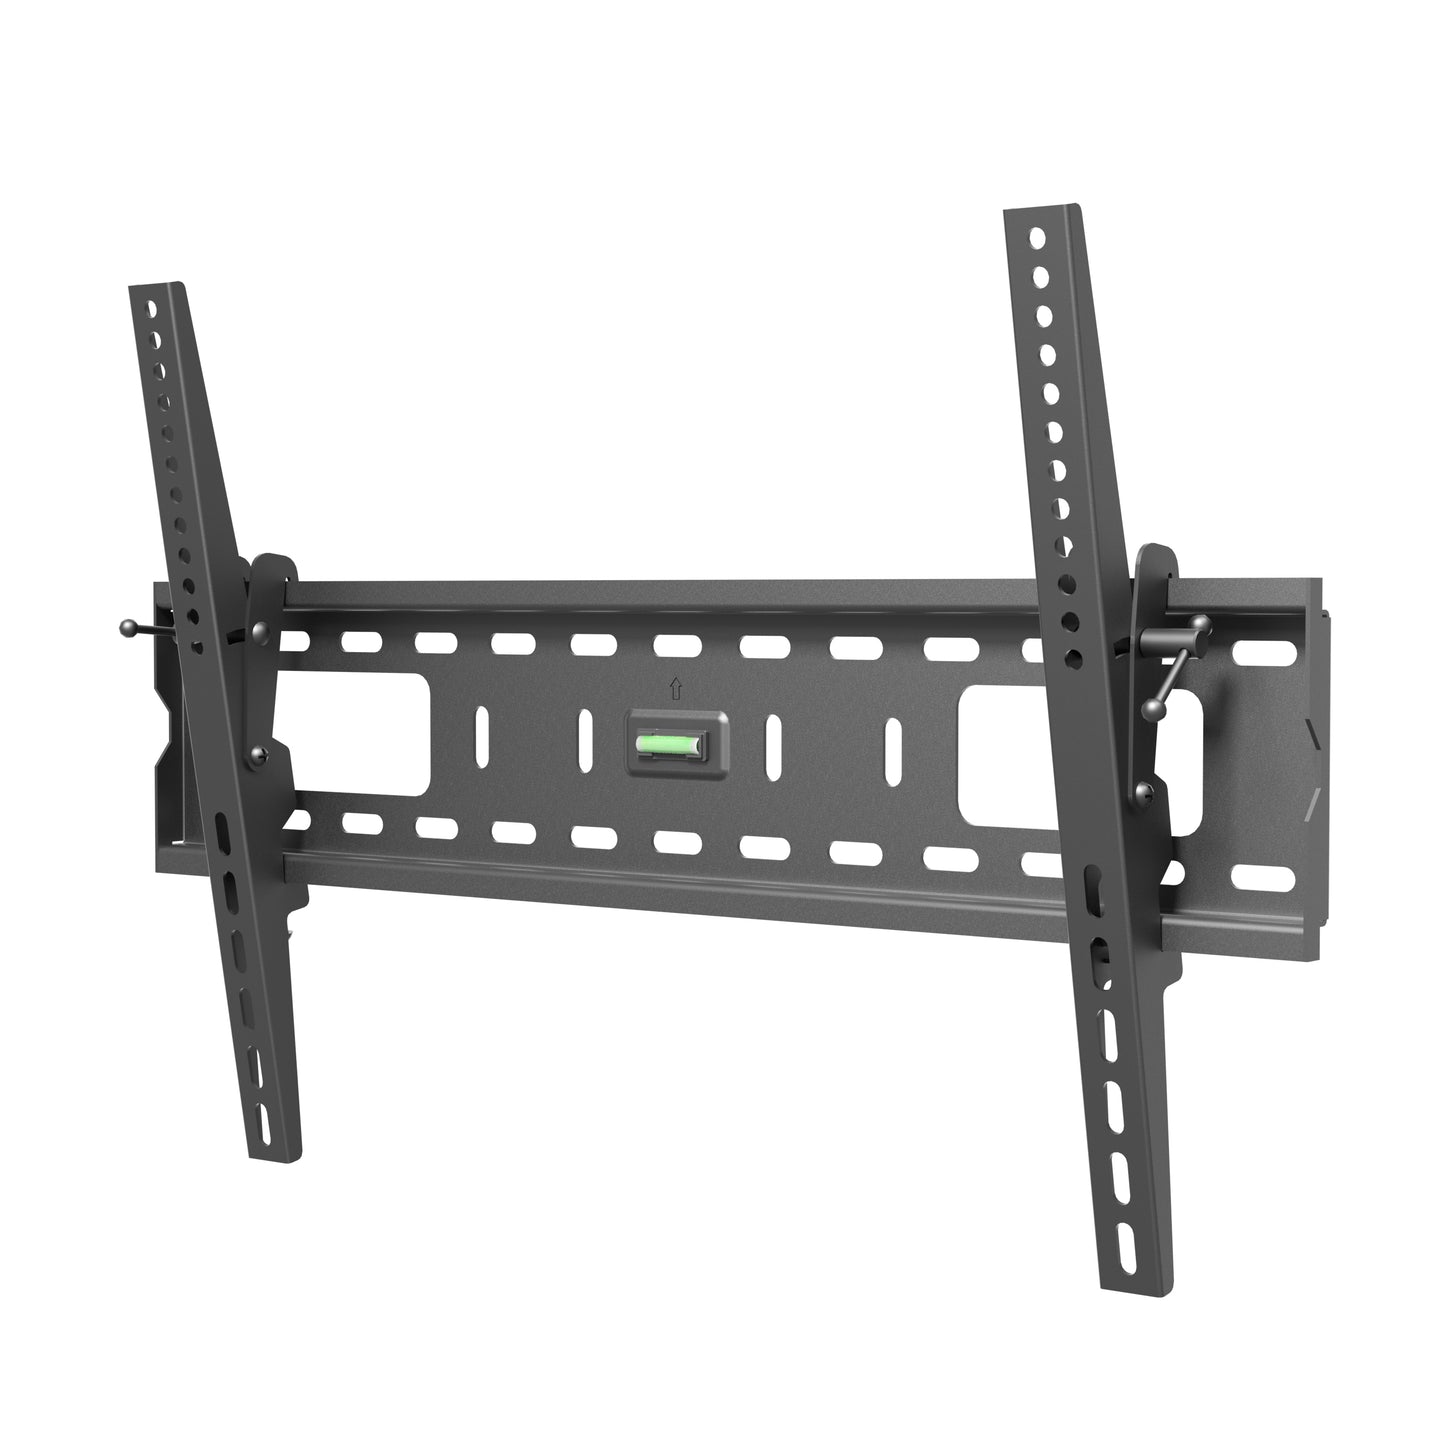 ProMounts Black Tilt Wall Mount for 42 to 84 inch Screens, Holds up to 165 lbs (FT64)